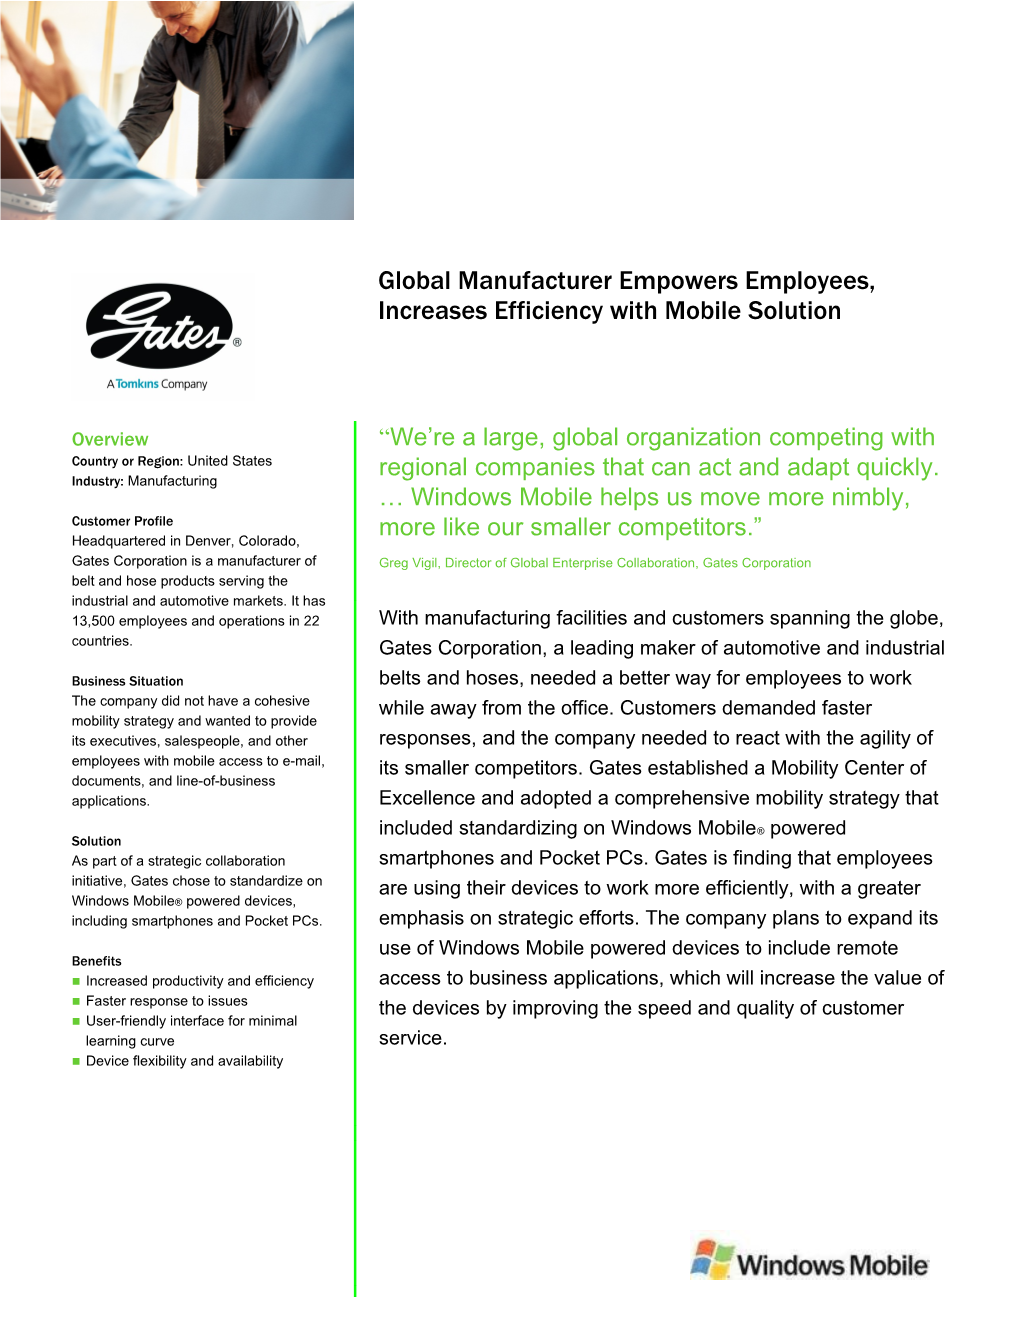 Global Manufacturer Empowers Employees, Increases Efficiency With Mobile Solution